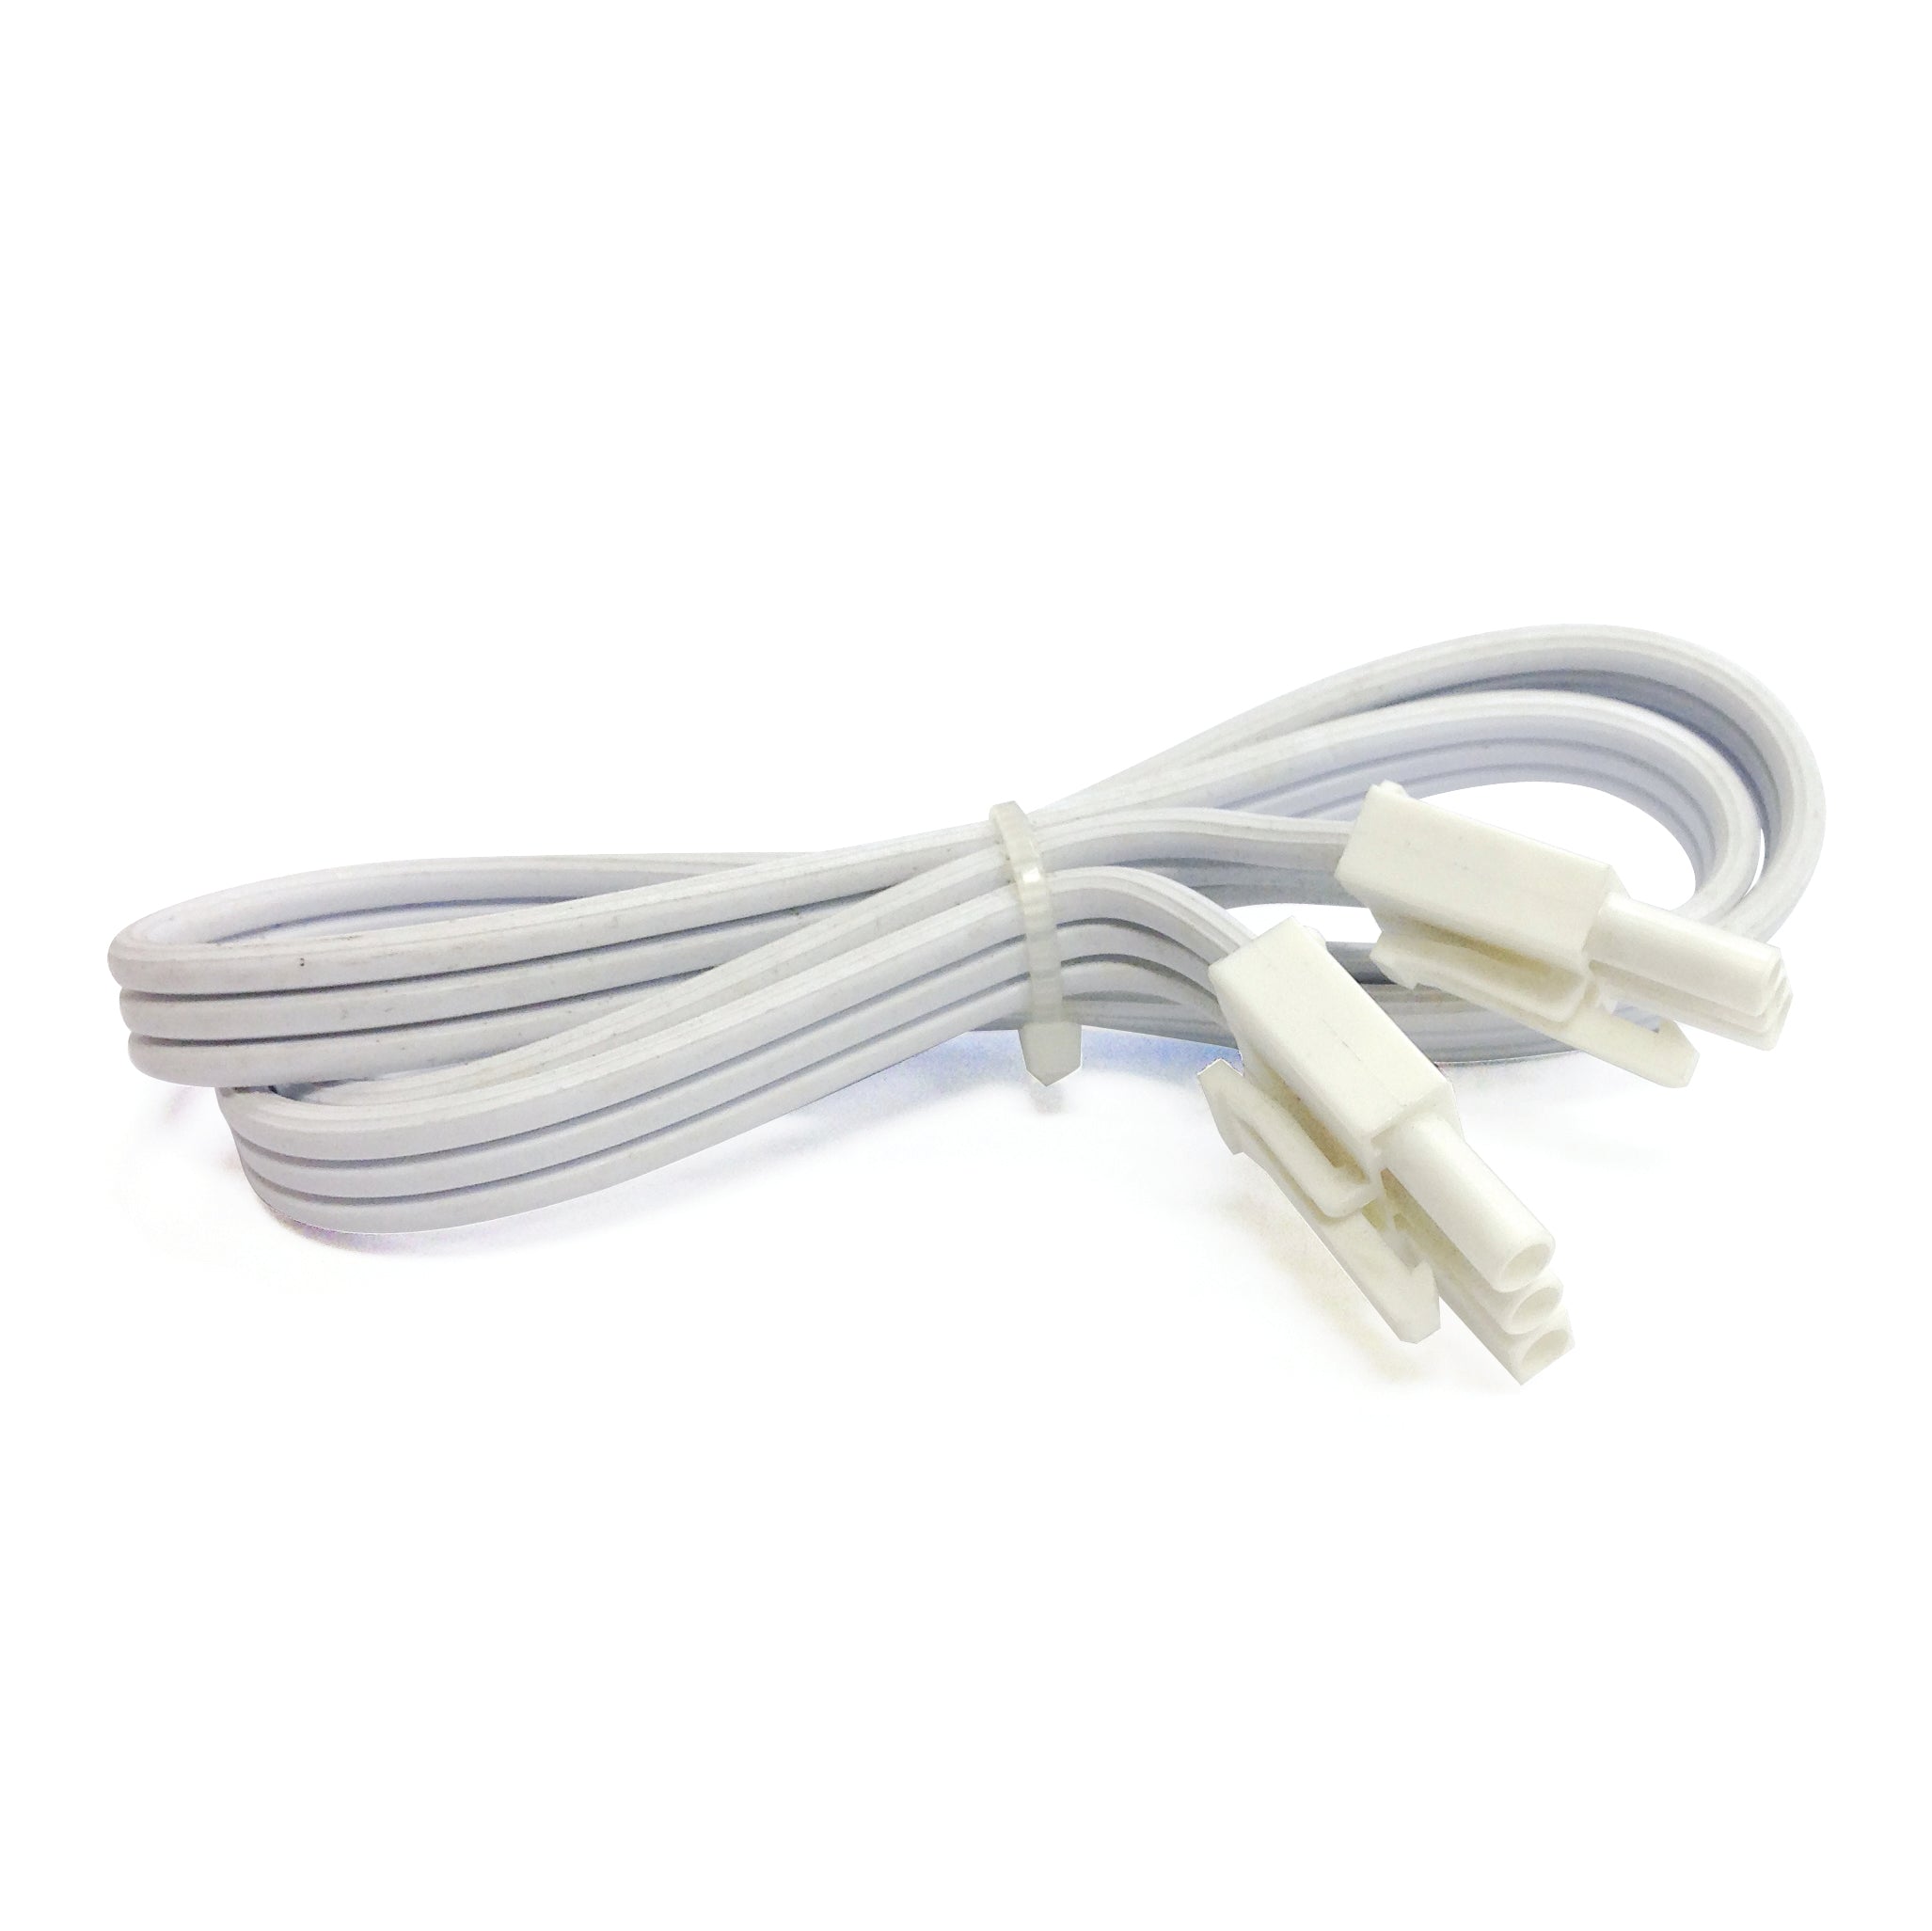 Nora Lighting NUA-824W - Accent / Undercabinet - 24 Inch LEDUR Interconnect Cable, White